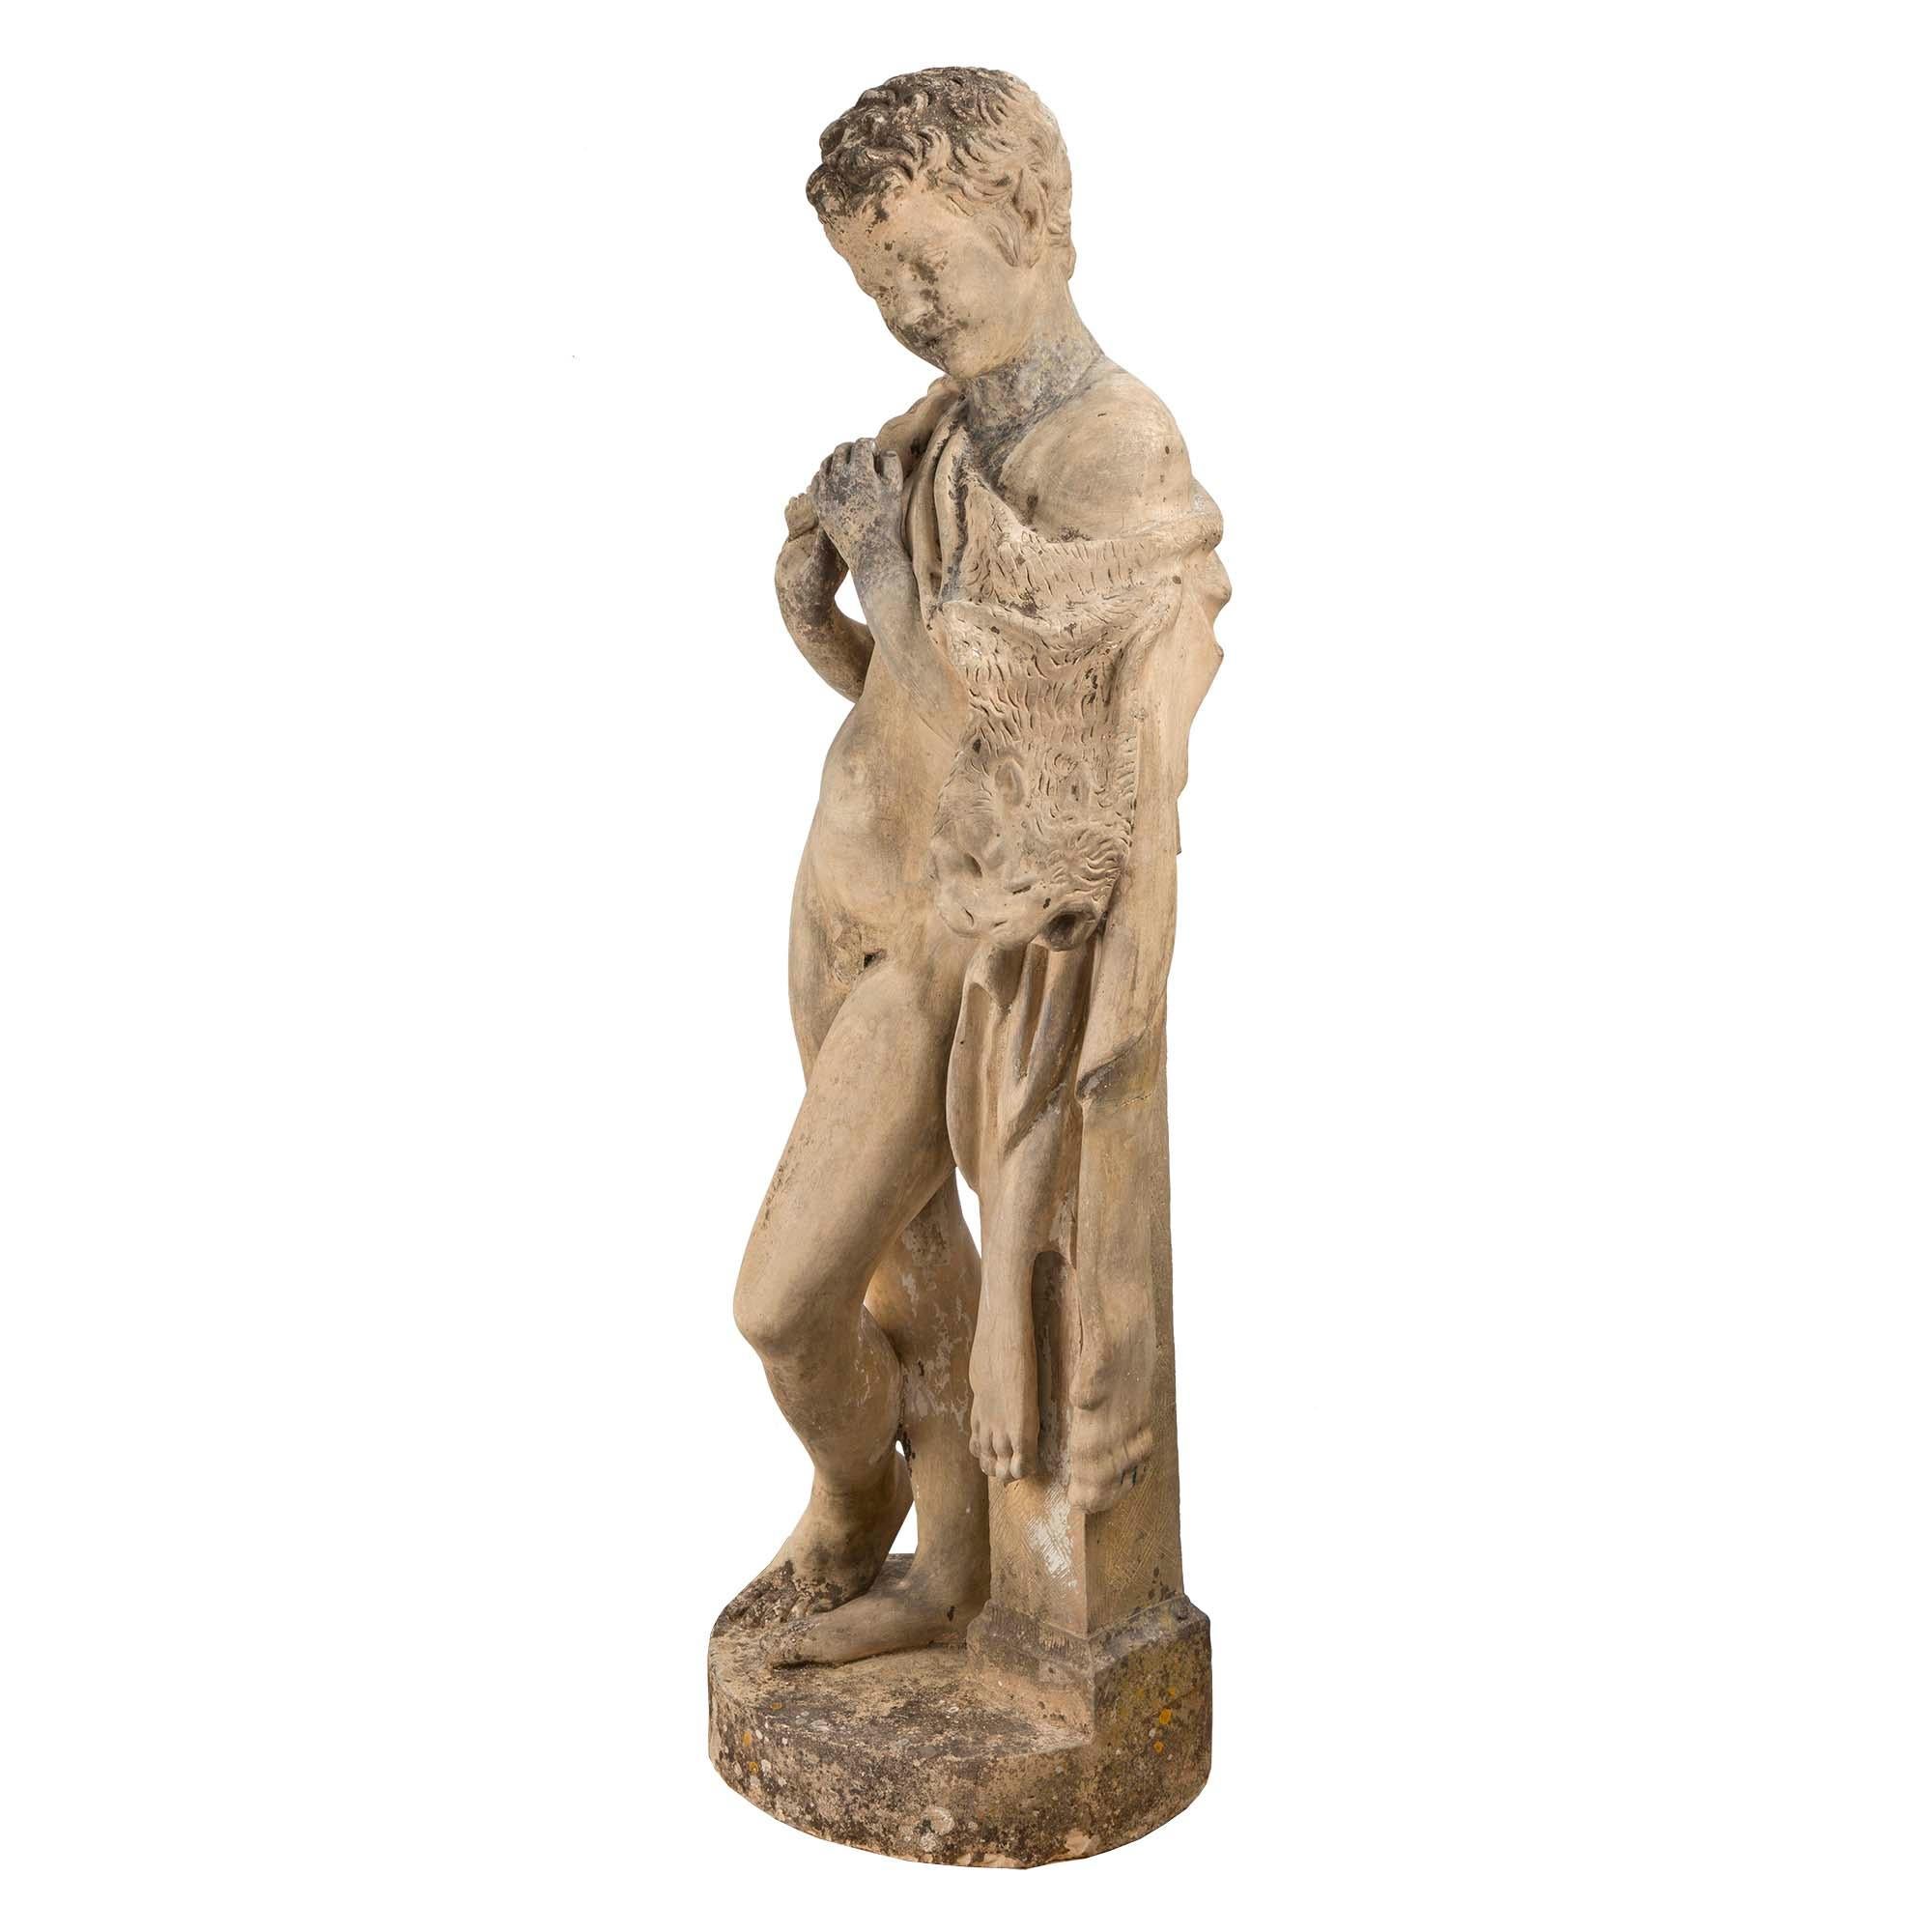 A most handsome and charming Continental 19th century terracotta statue of a young hunter. The young boy is standing on a circular base, leaning on a column. He is draped in his hunting spoils and is holding a flute. Rich wonderful details